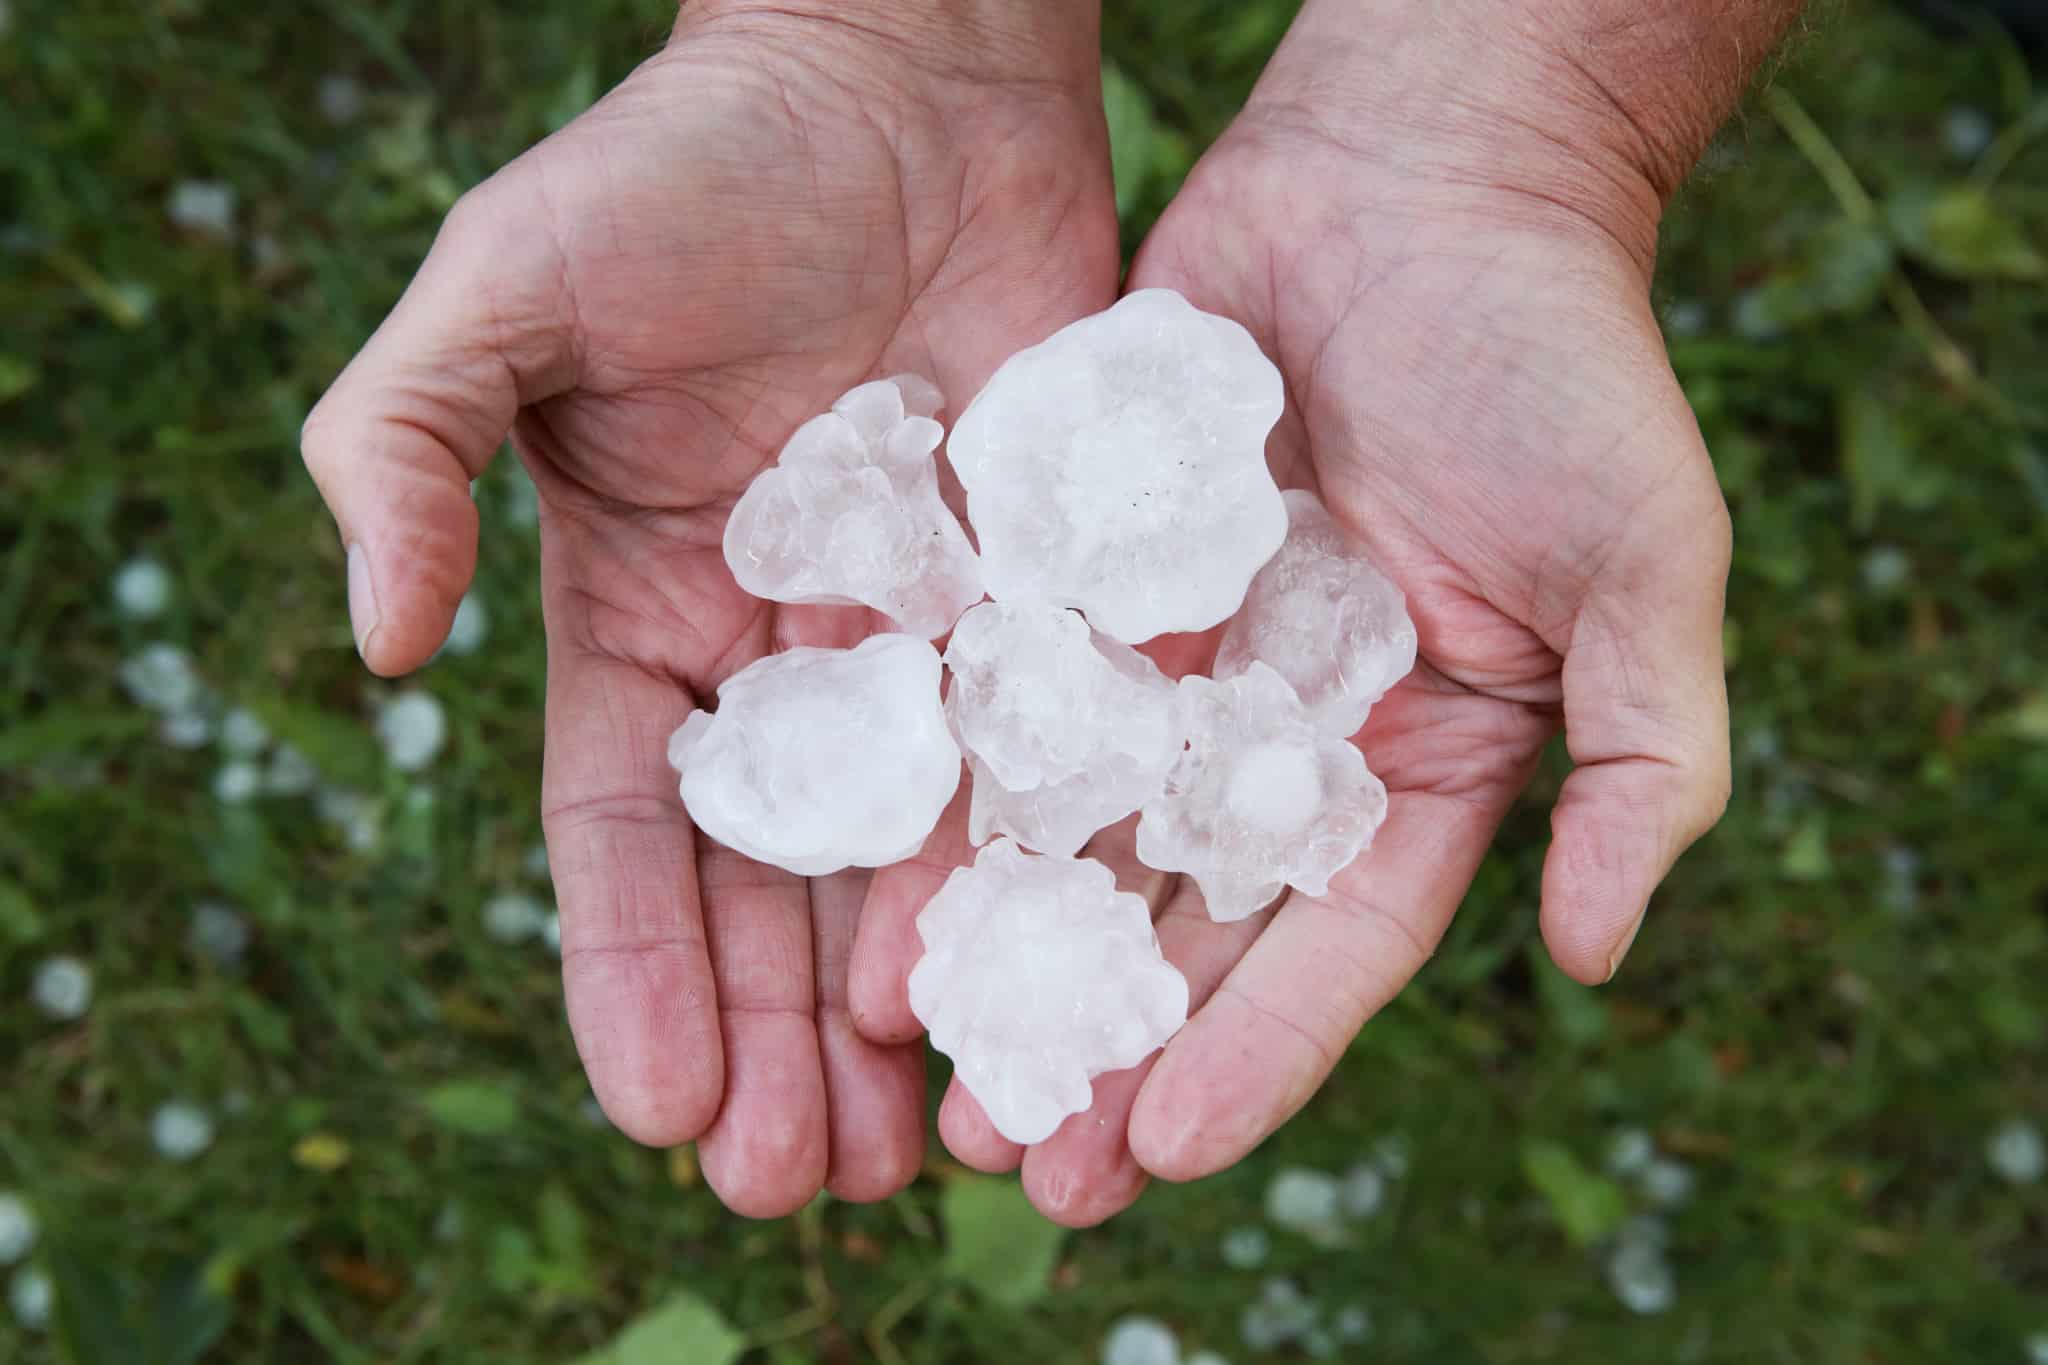 CleanMaster Services responds to and restores property damaged by hail, wind and storms